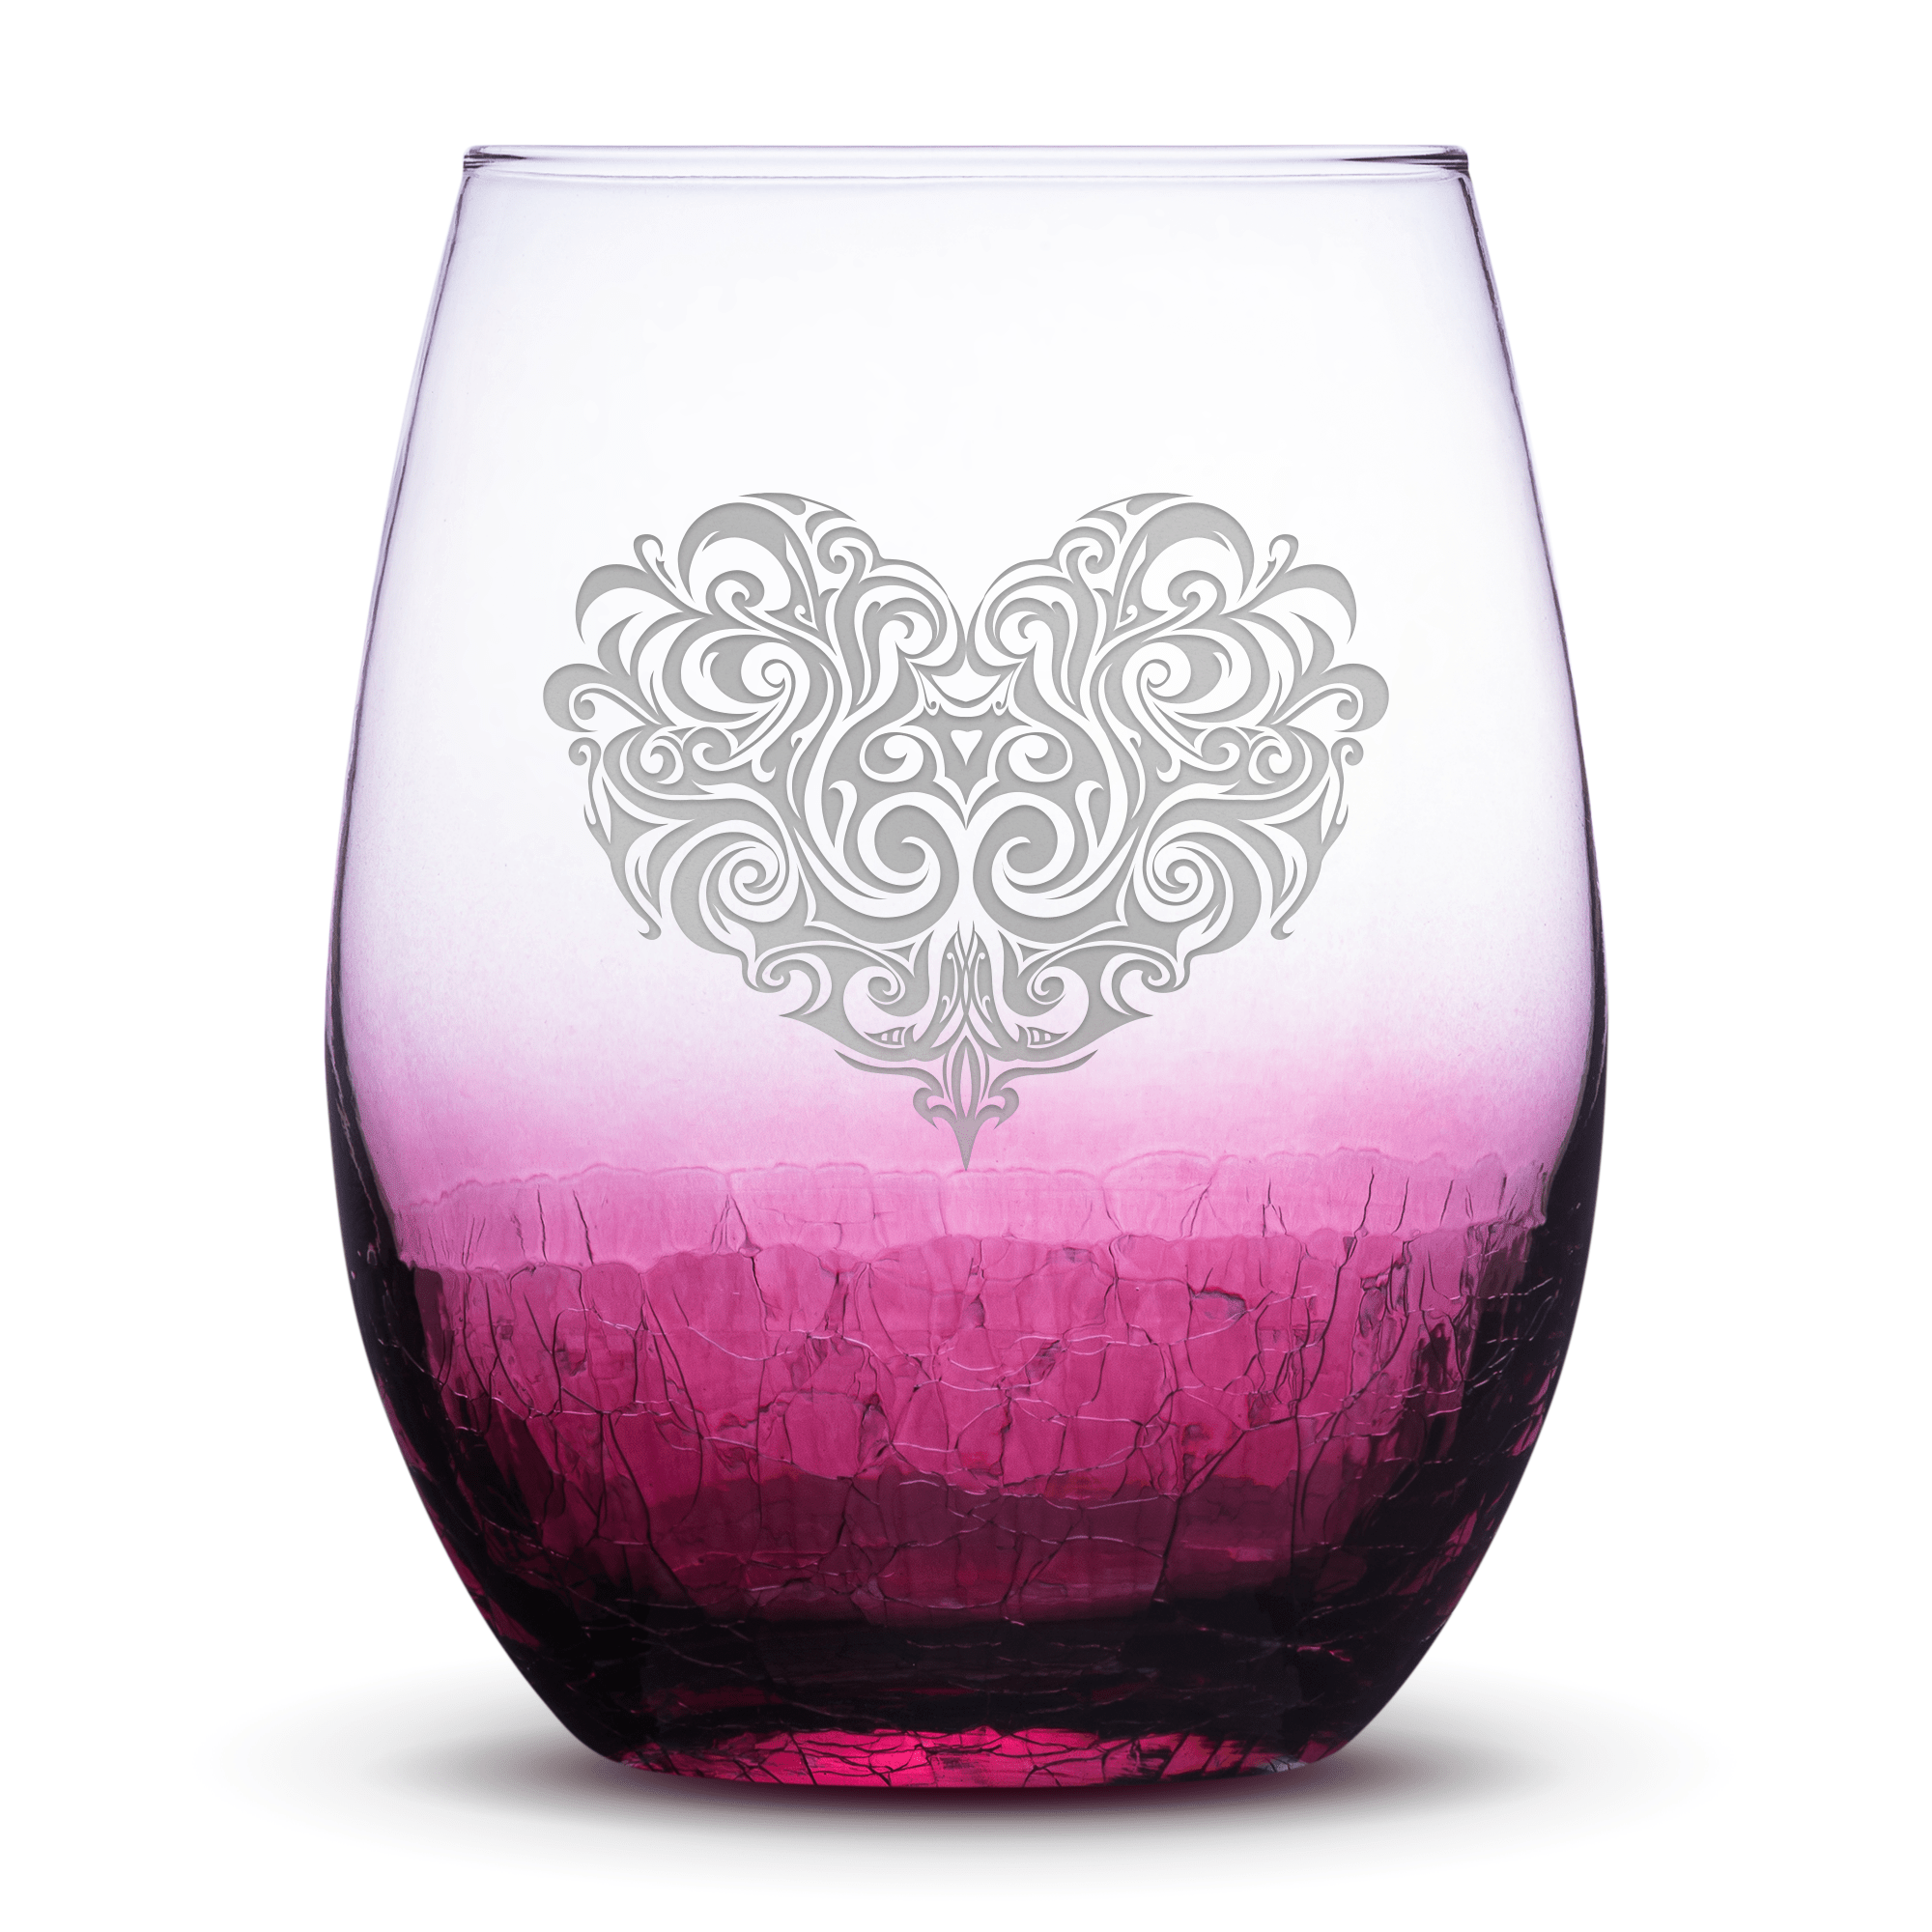 https://cdn.shopify.com/s/files/1/1400/5987/products/crackle-raspberry-wine-glass-tribal-heart-design-hand-etched-18oz-integrity-bottles-28798817108067_2000x.png?v=1643841218